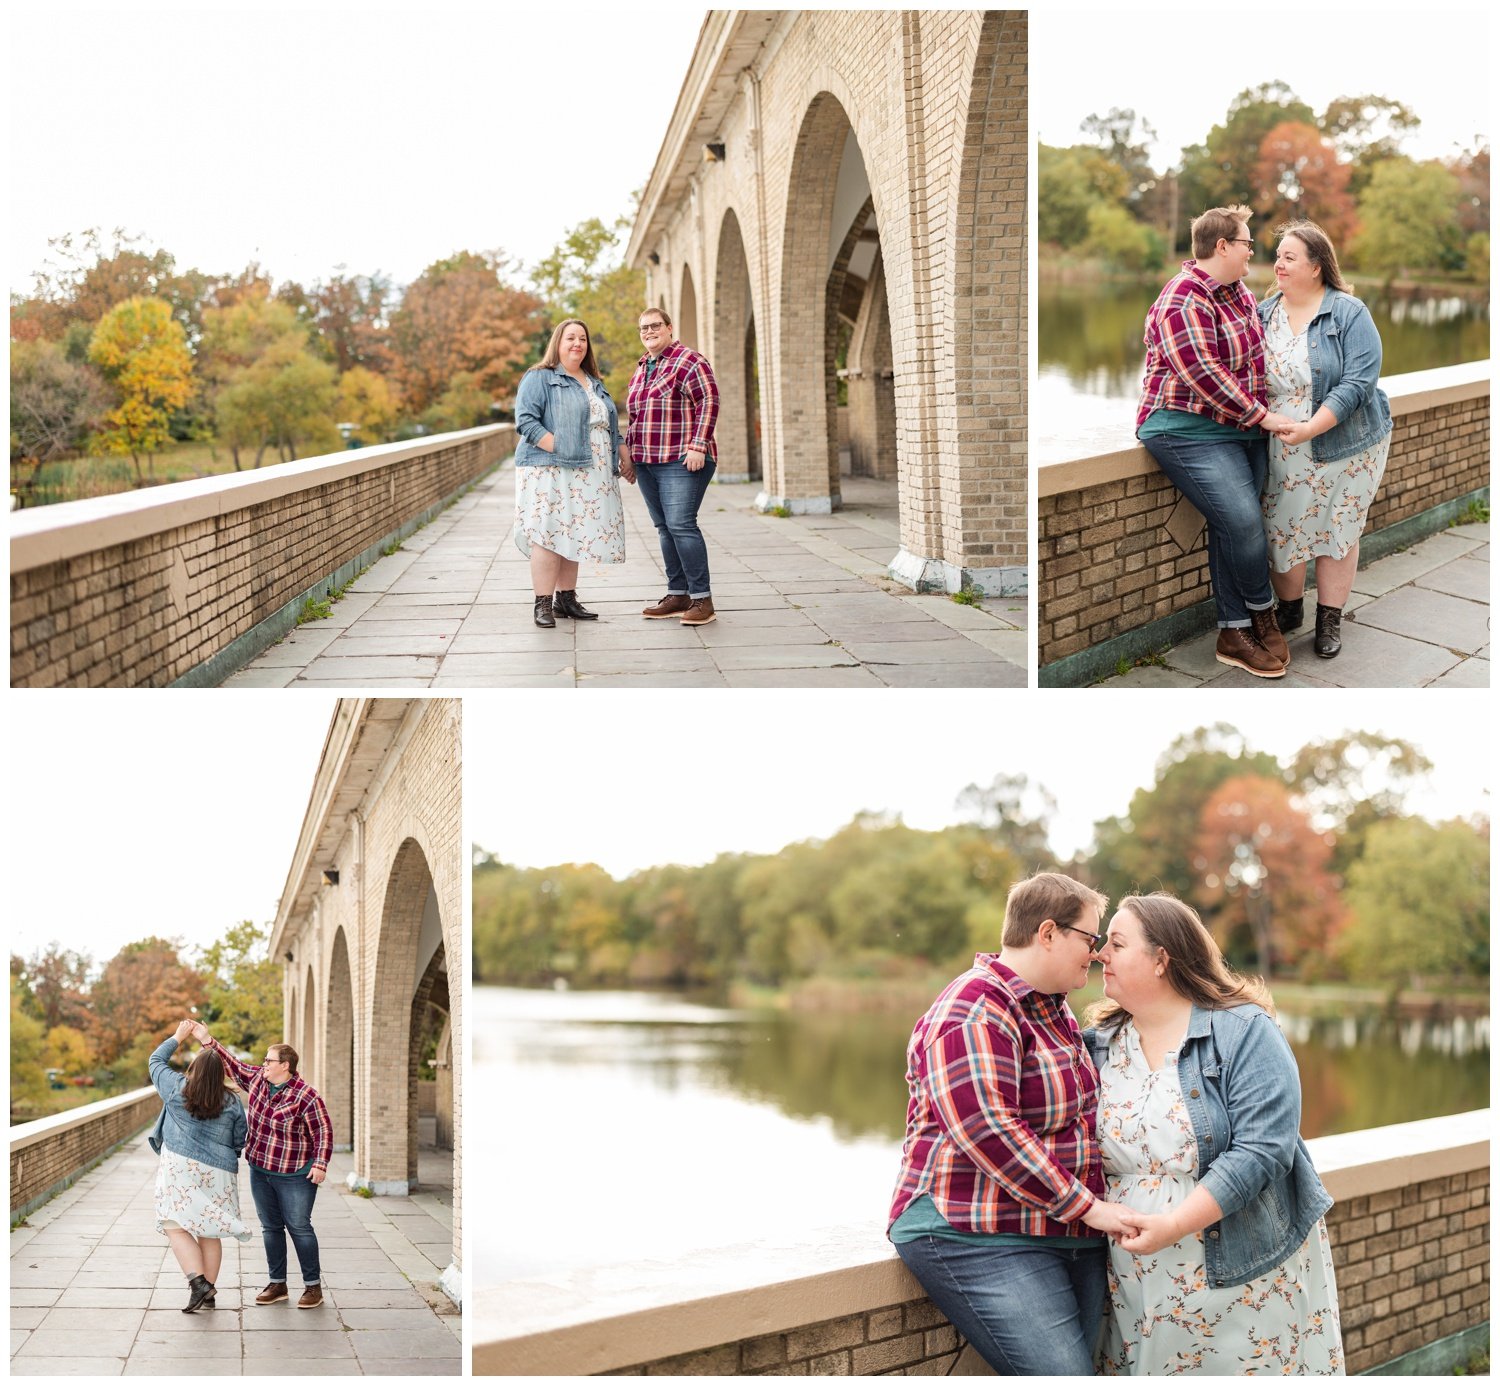 South-Philly-LGBTQ-Fall-Engagement-Session-Location-2.jpg